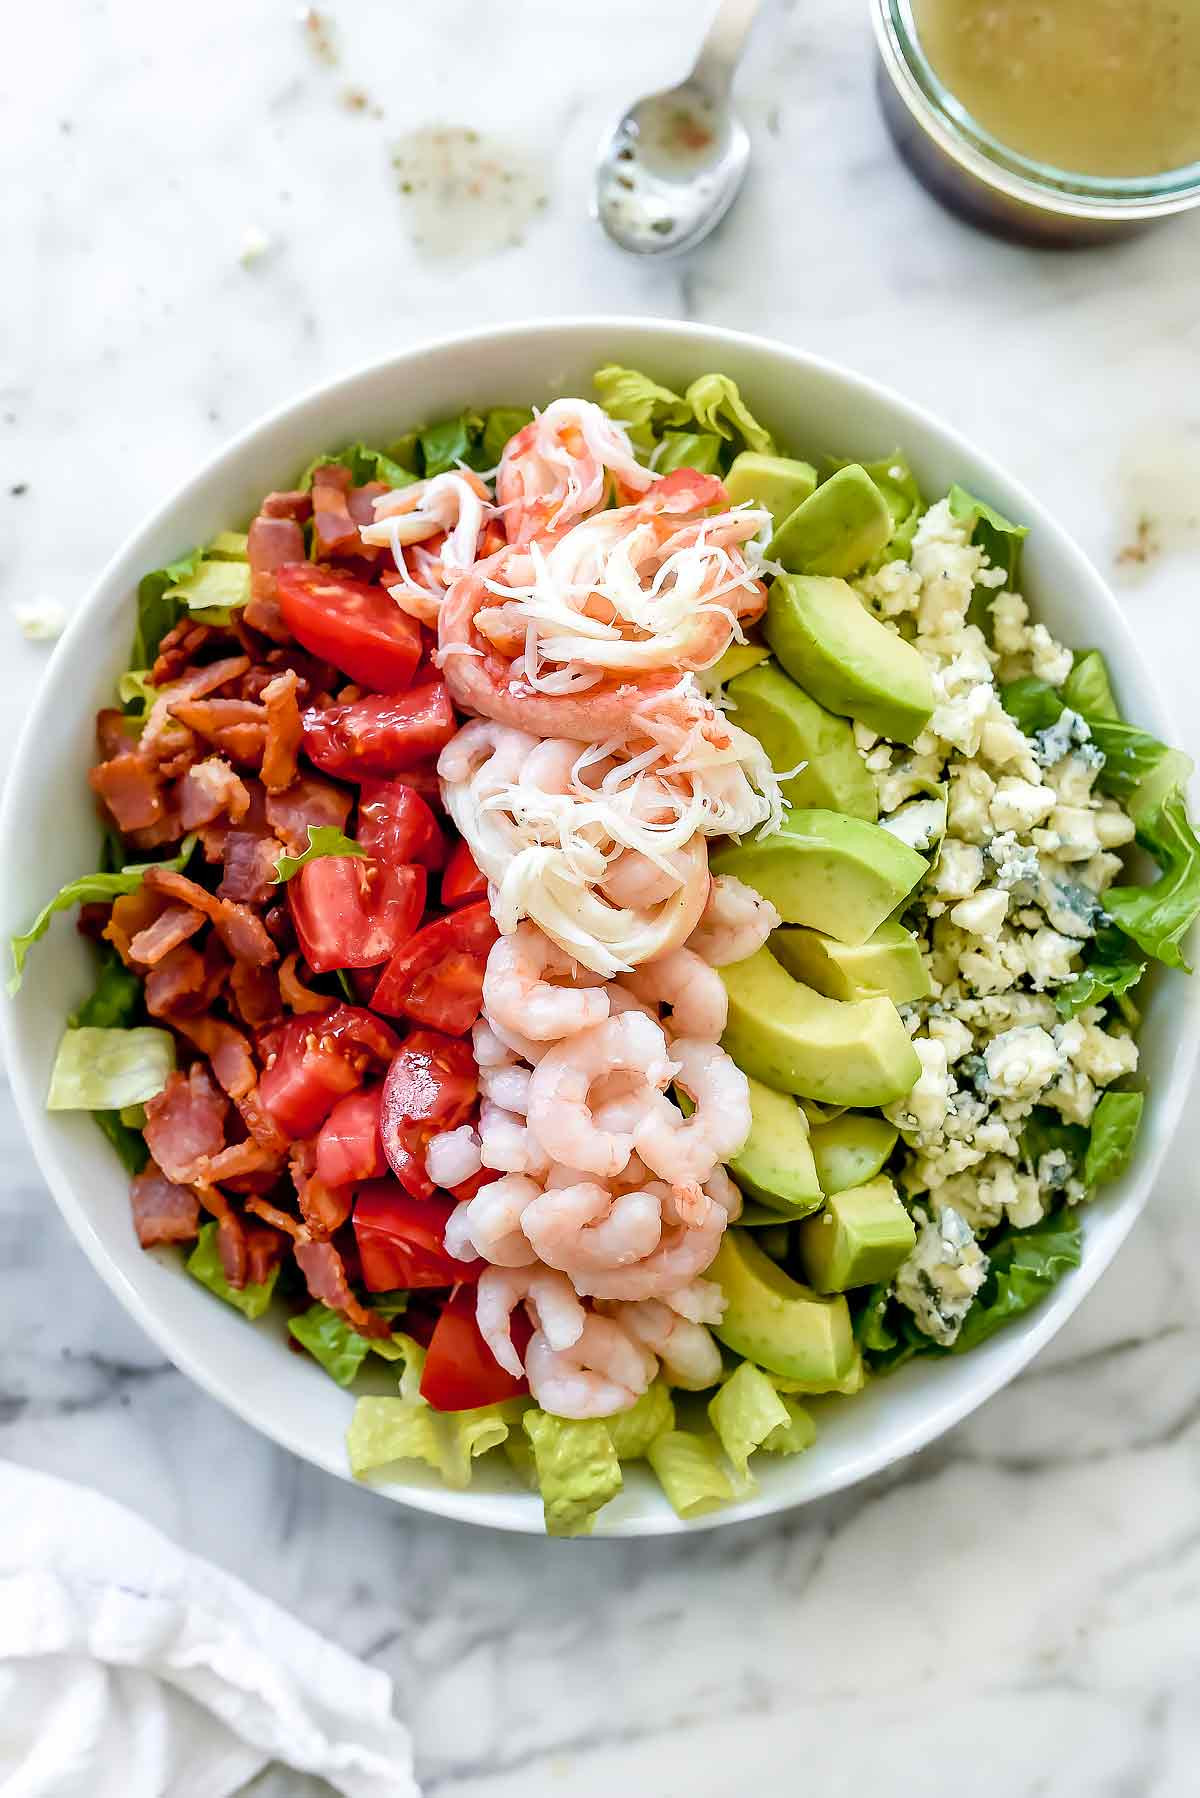 15 Ideas for Shrimp and Crab Salad